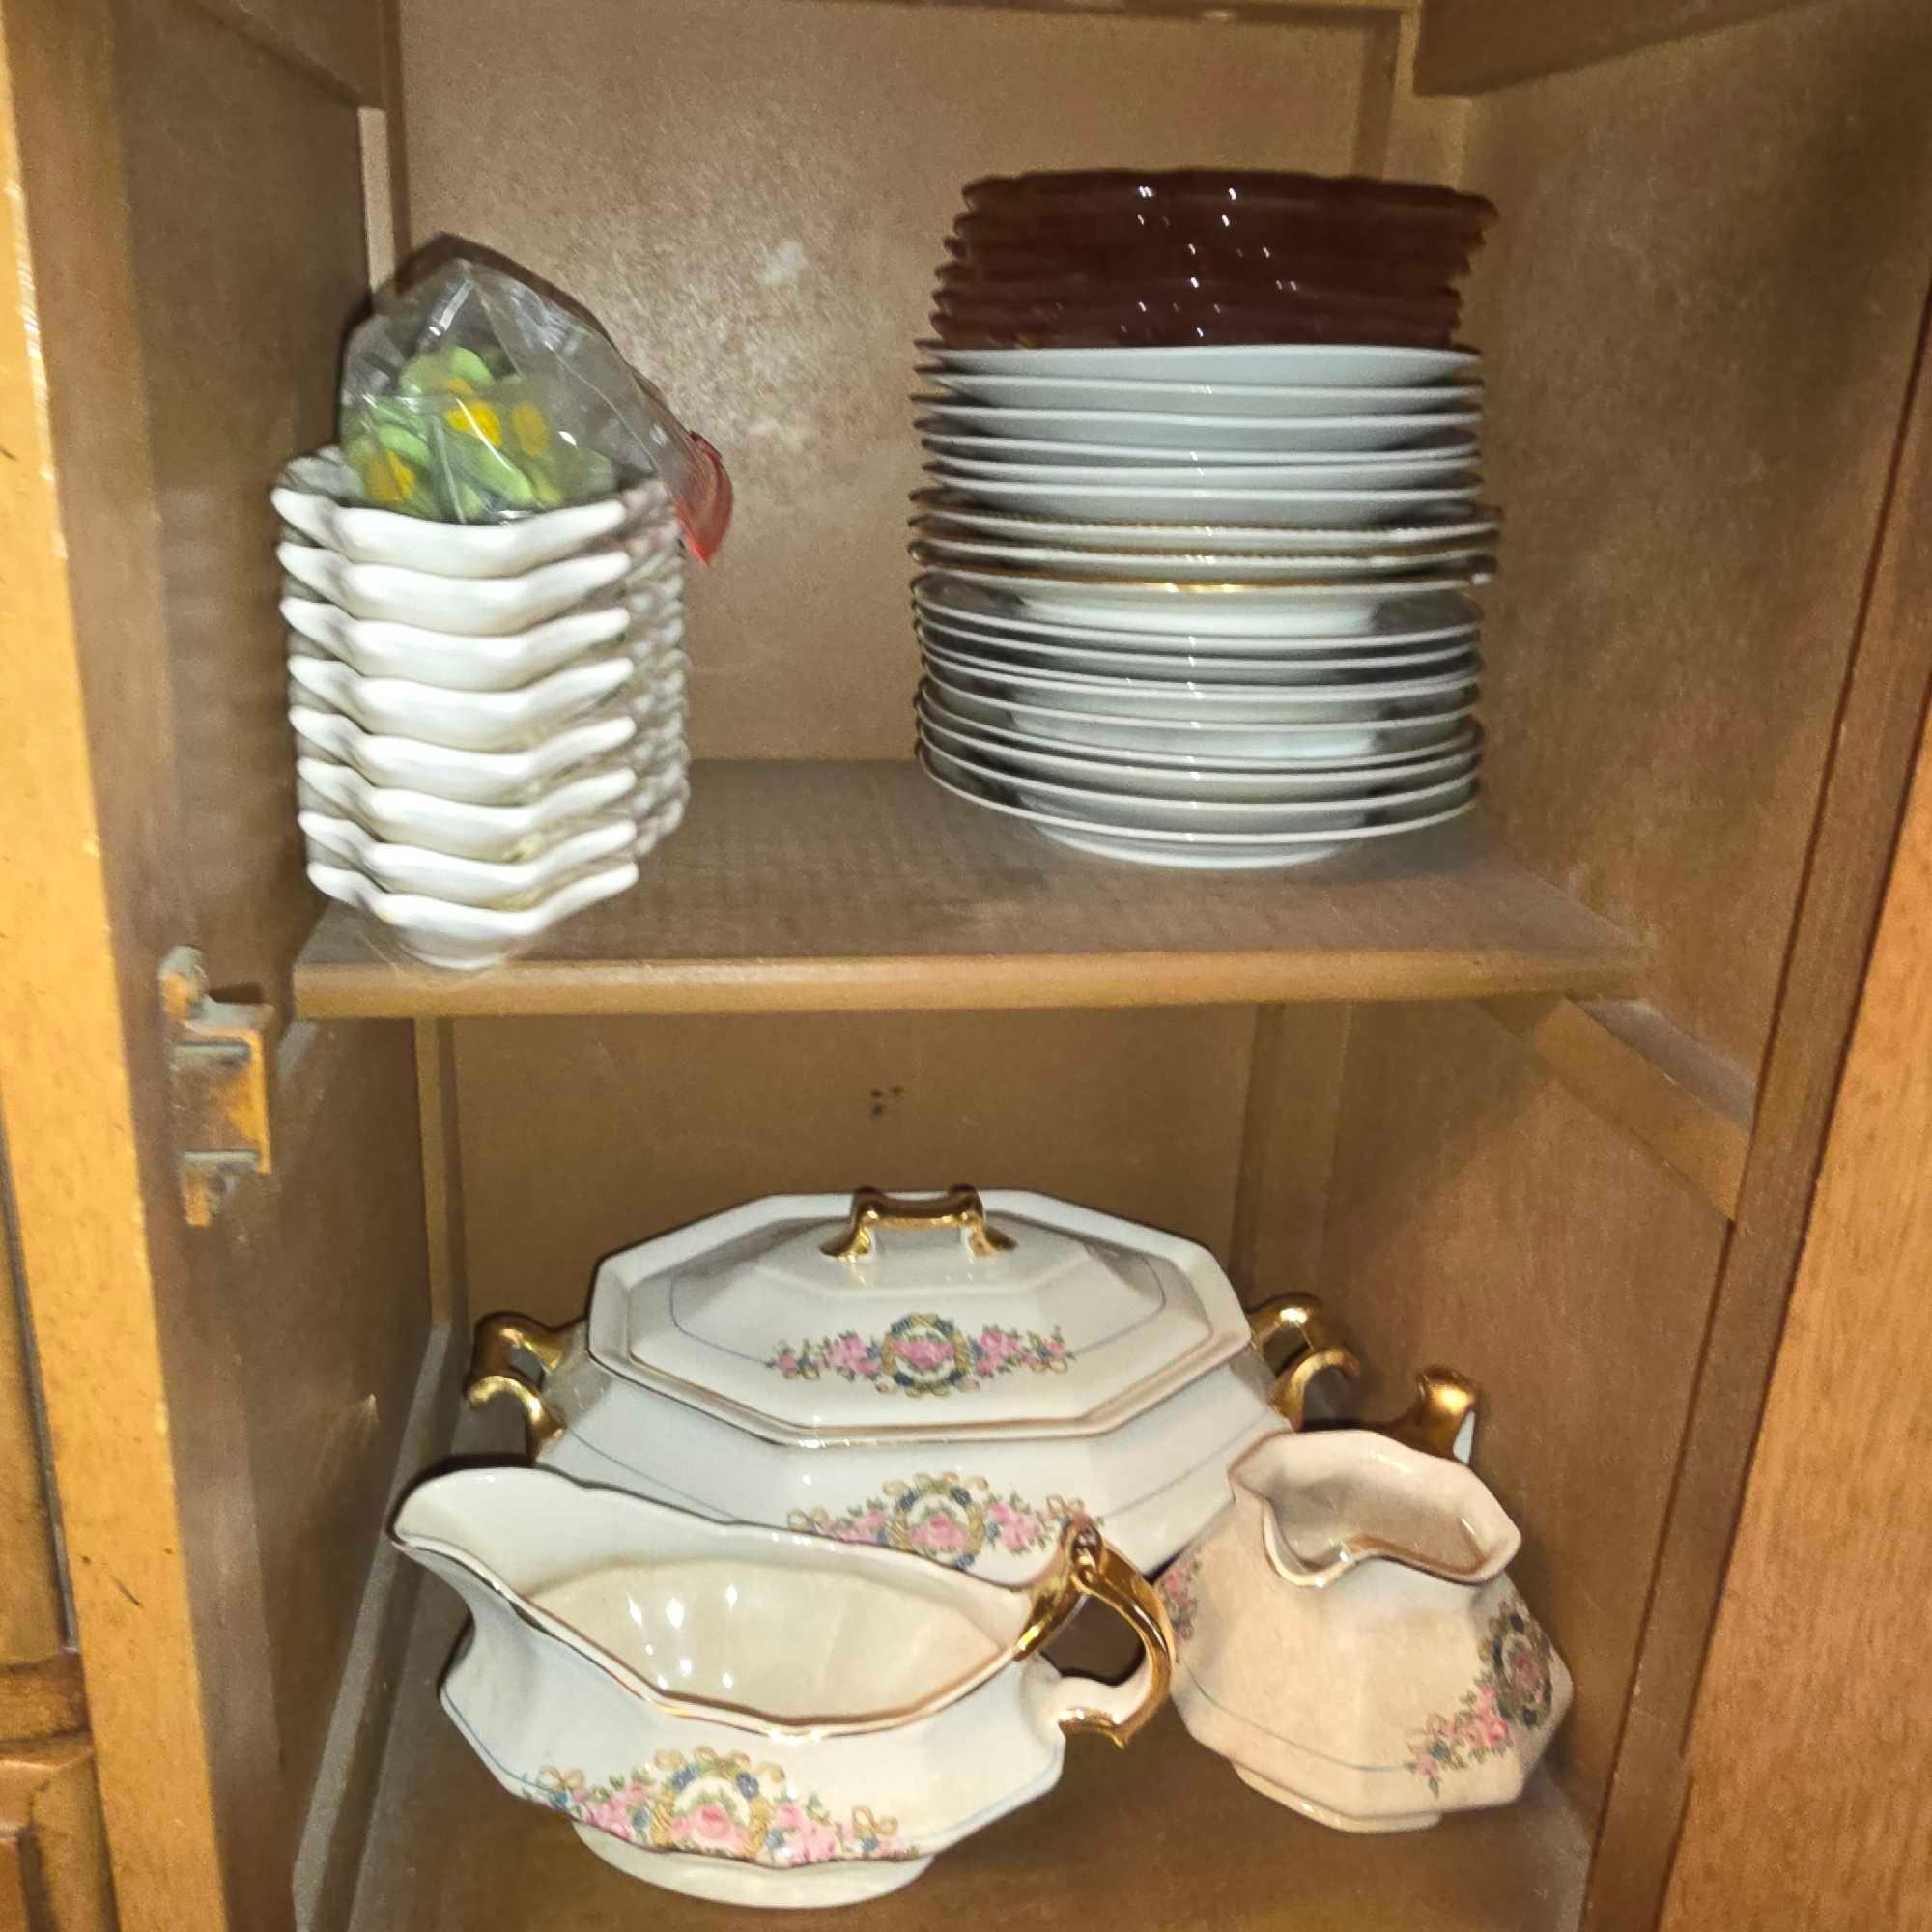 Contents of Hutch - Fashion Manor China Set & Assorted Glassware